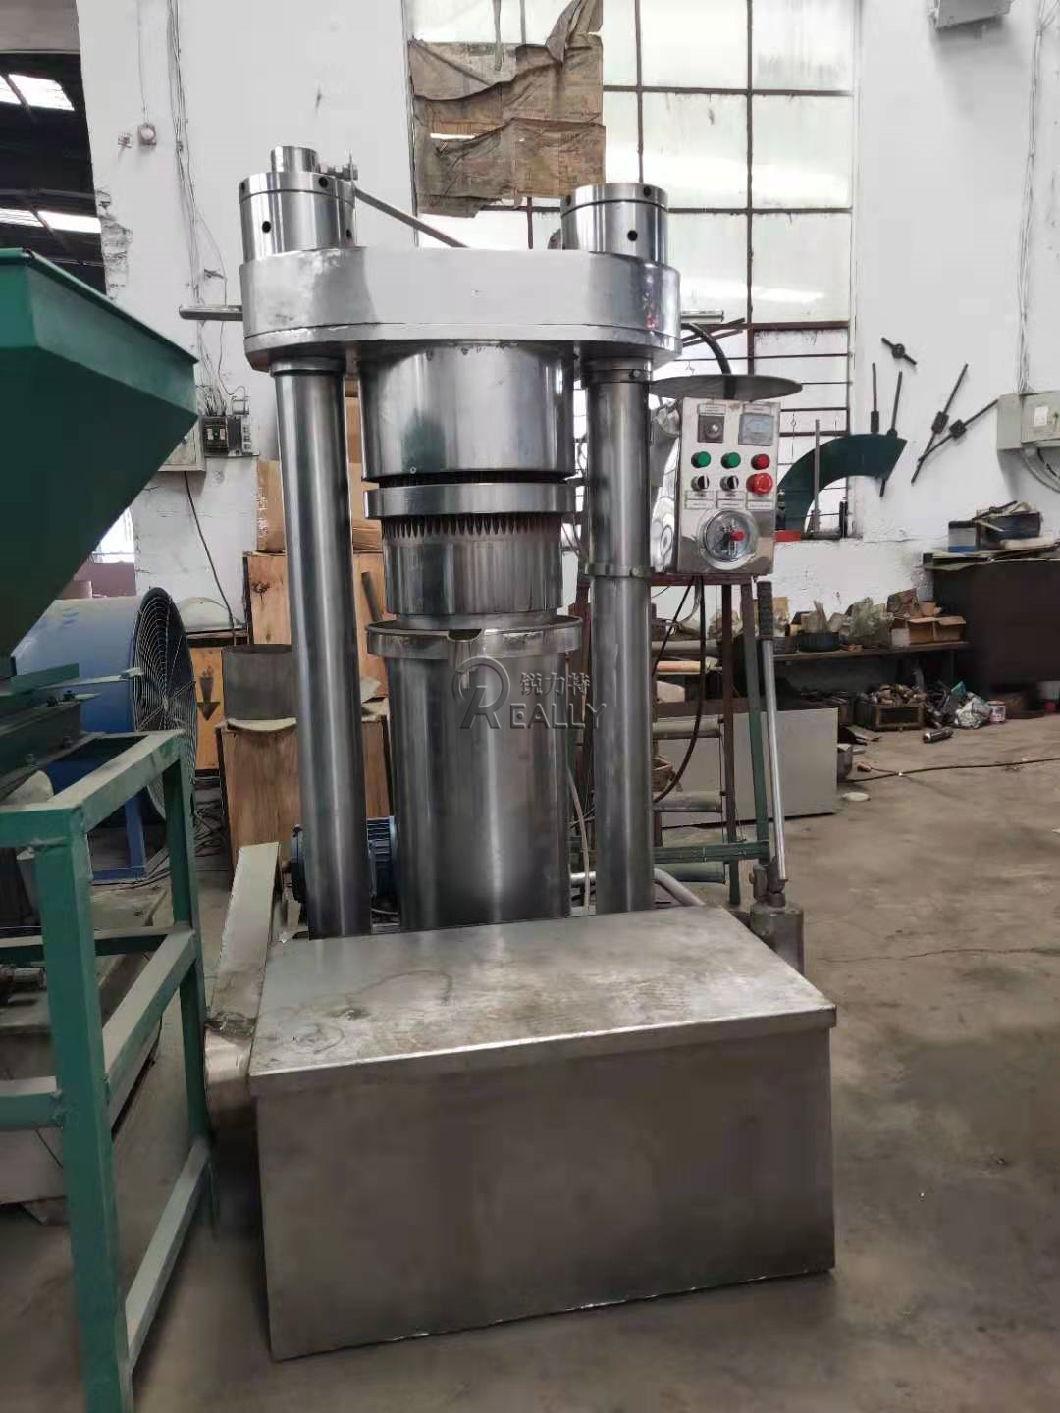 Hydraulic Cold Nuts Oil Pressing Extractor Sunflower Seeds Coconut Oil Expeller Extraction Industrial Cold Pressed Oil Press Equipment